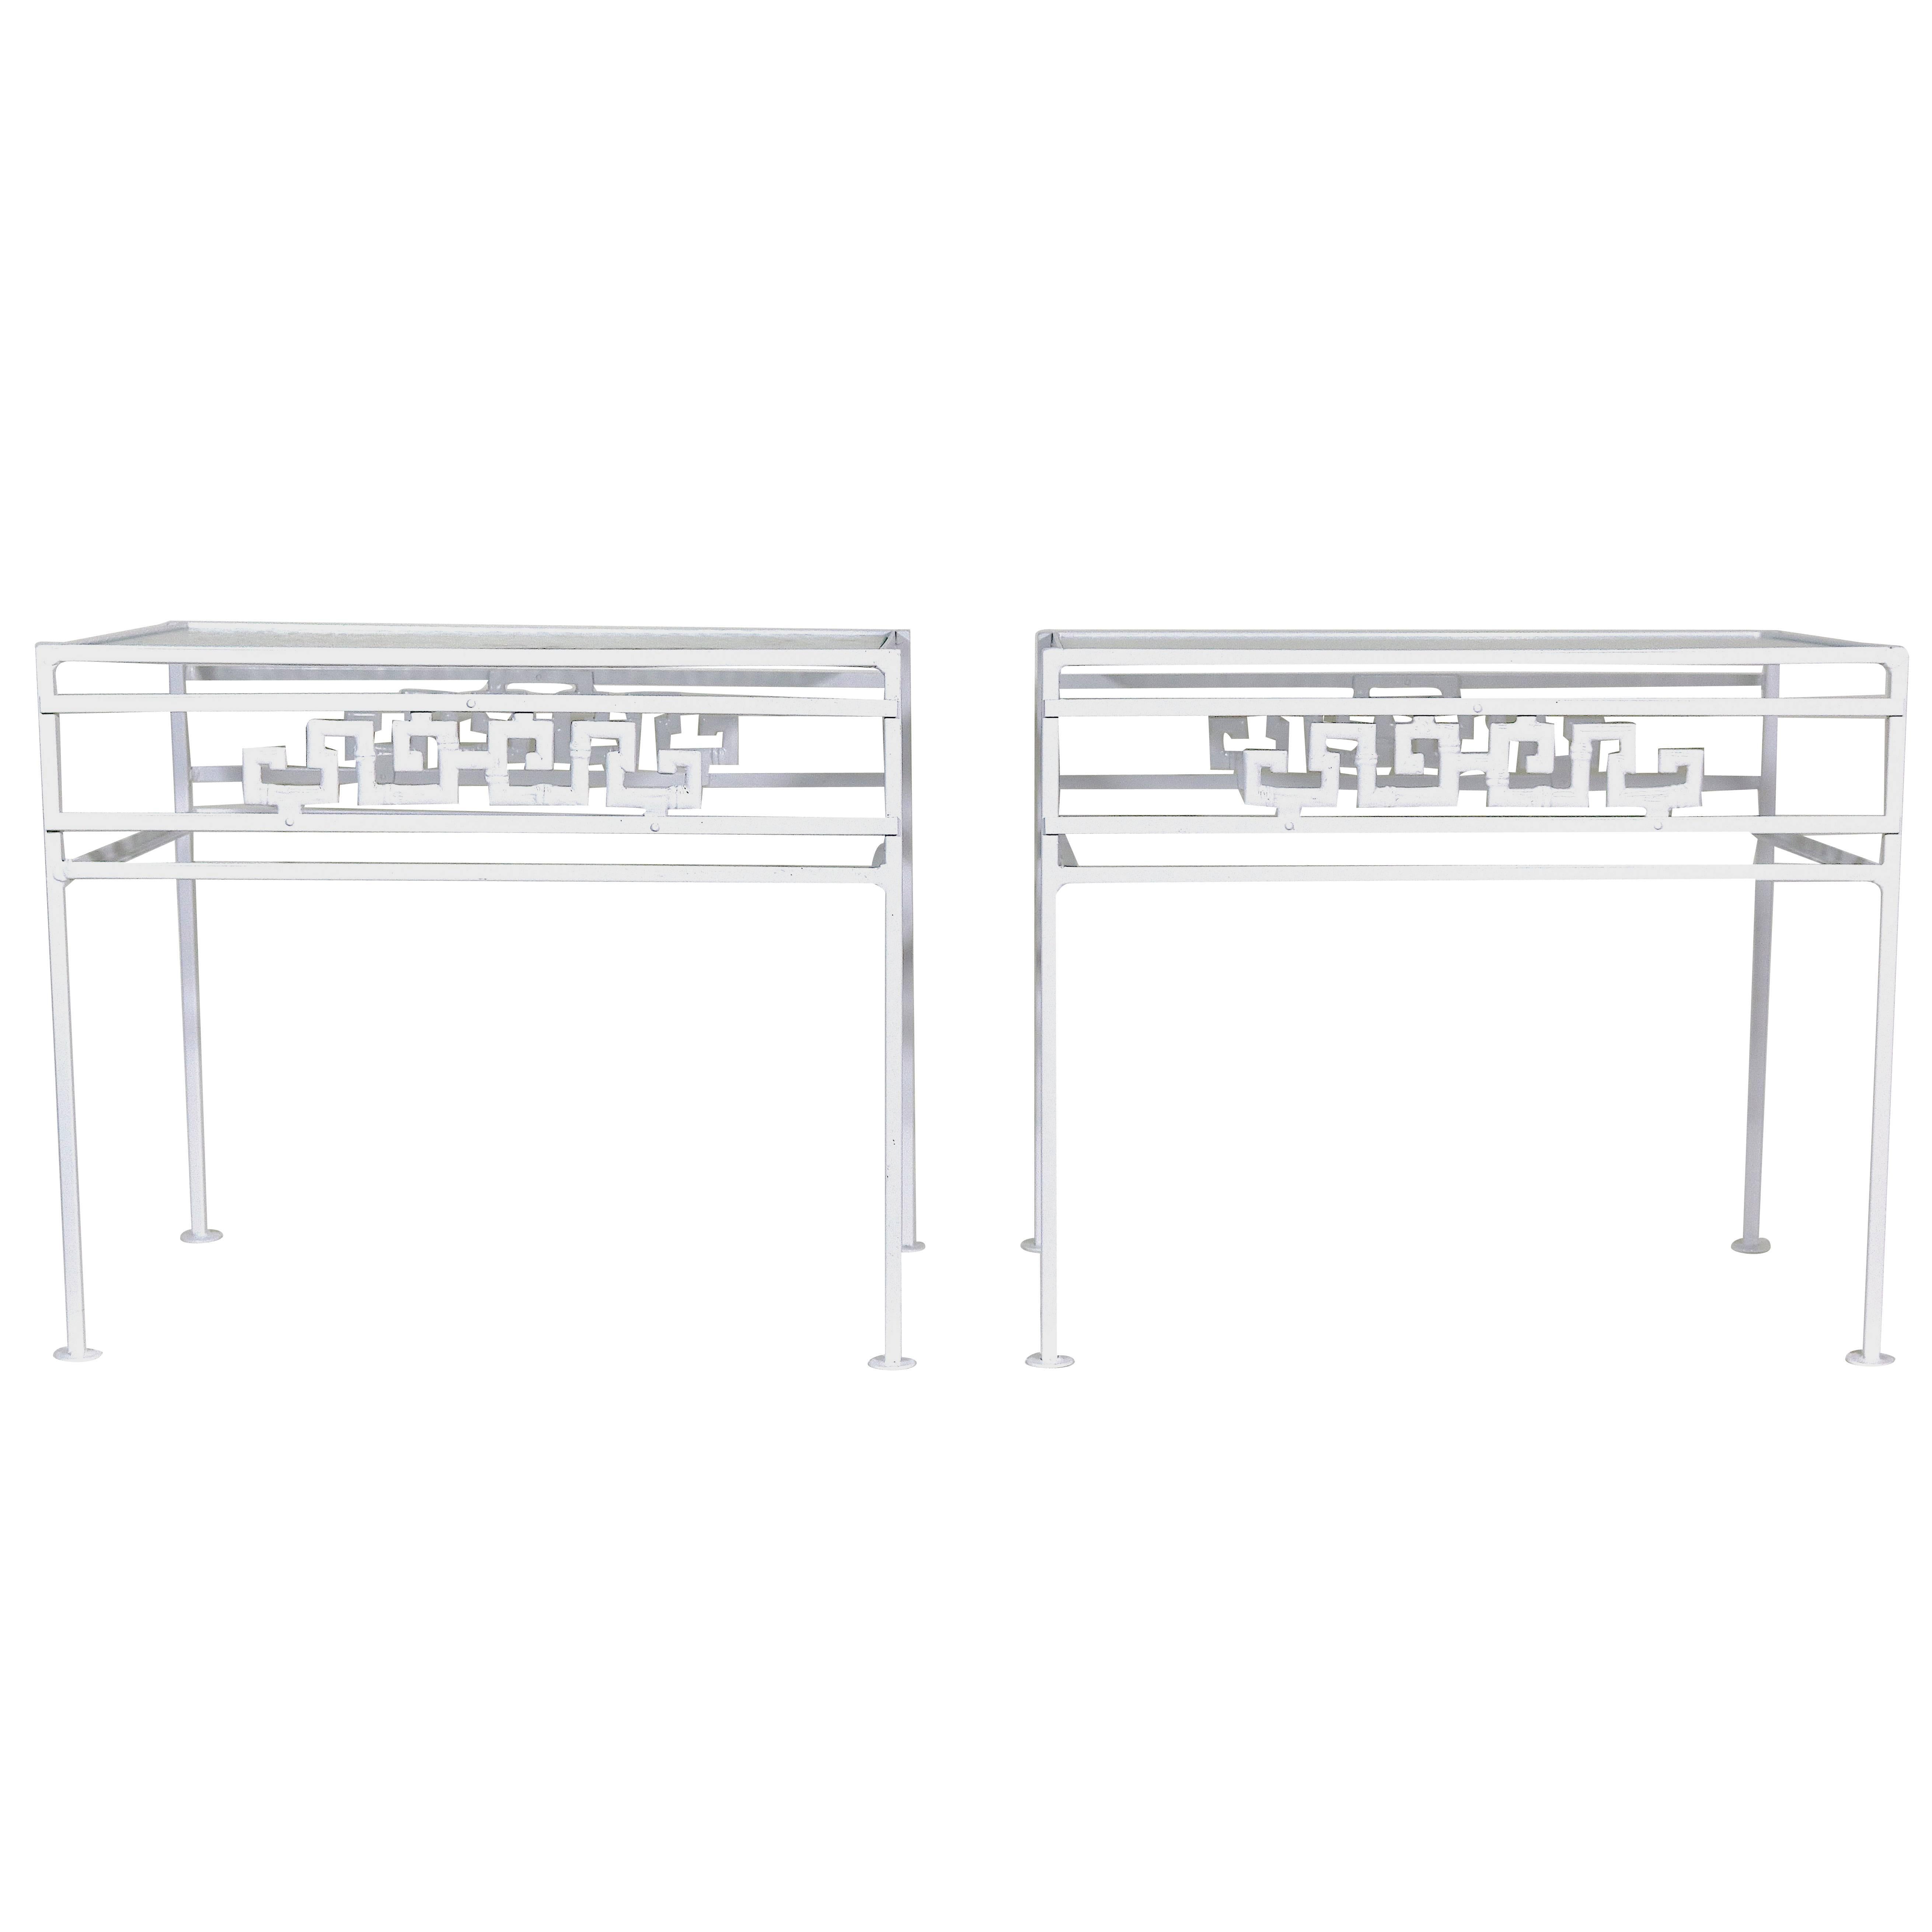 Stylish Mid-Century Modern, Hollywood Regency, Salterini aluminum pair of side tables with Greek key design. Totally restored- the aluminum is newly white powder coated, the tops still have the original cool crinkle glass. Great style for your